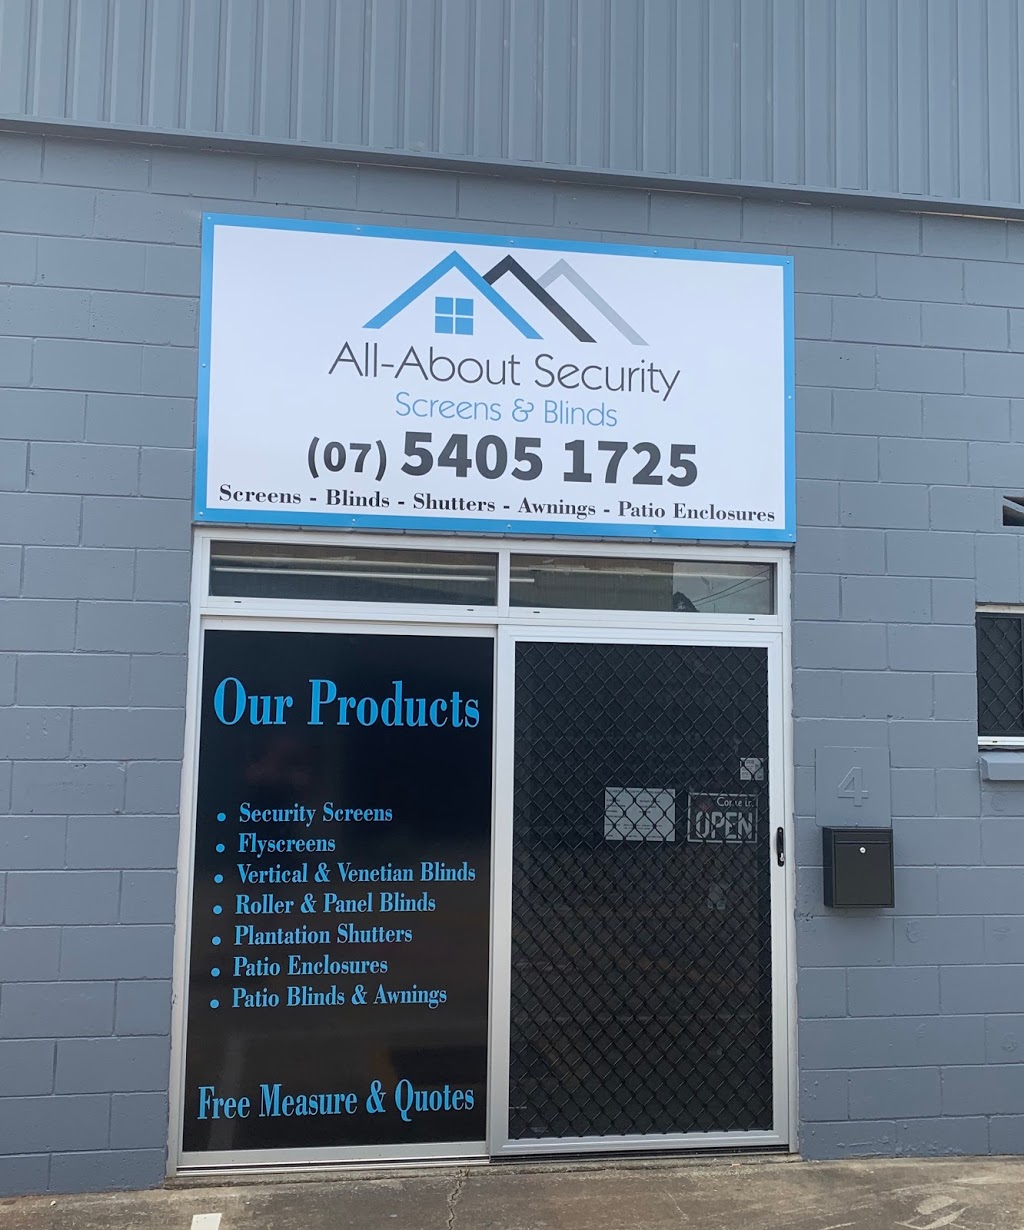 All-About Security Screens & Blinds Pty Ltd | Shed 4/15 Industry Dr, Caboolture QLD 4510, Australia | Phone: (07) 5405 1725